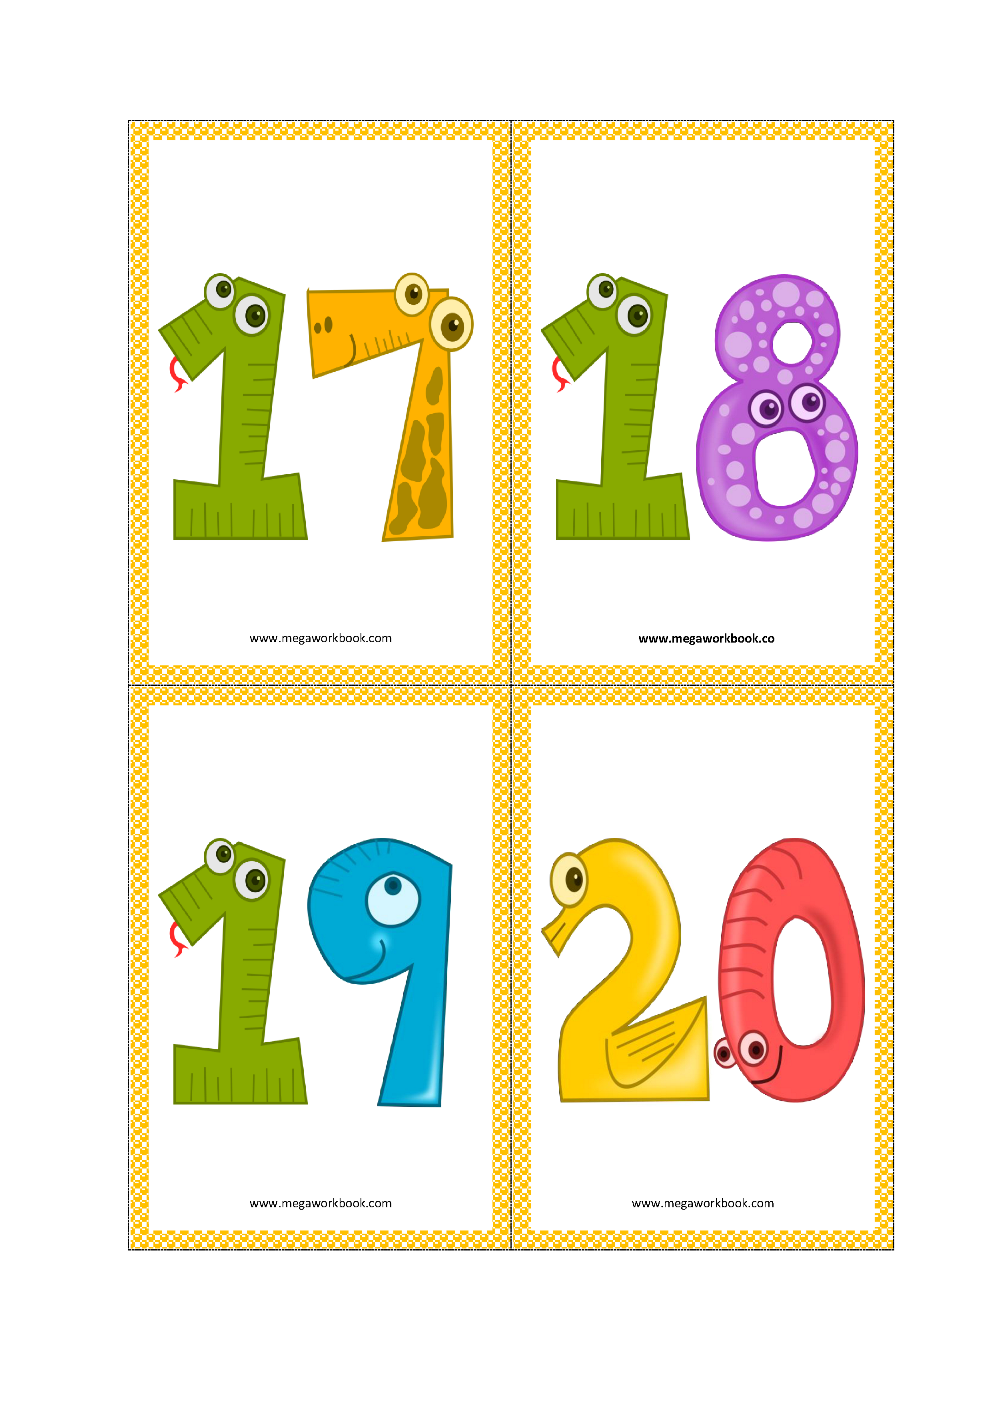 colored-printable-numbers-1-10-number-wall-cards-for-preschoolers